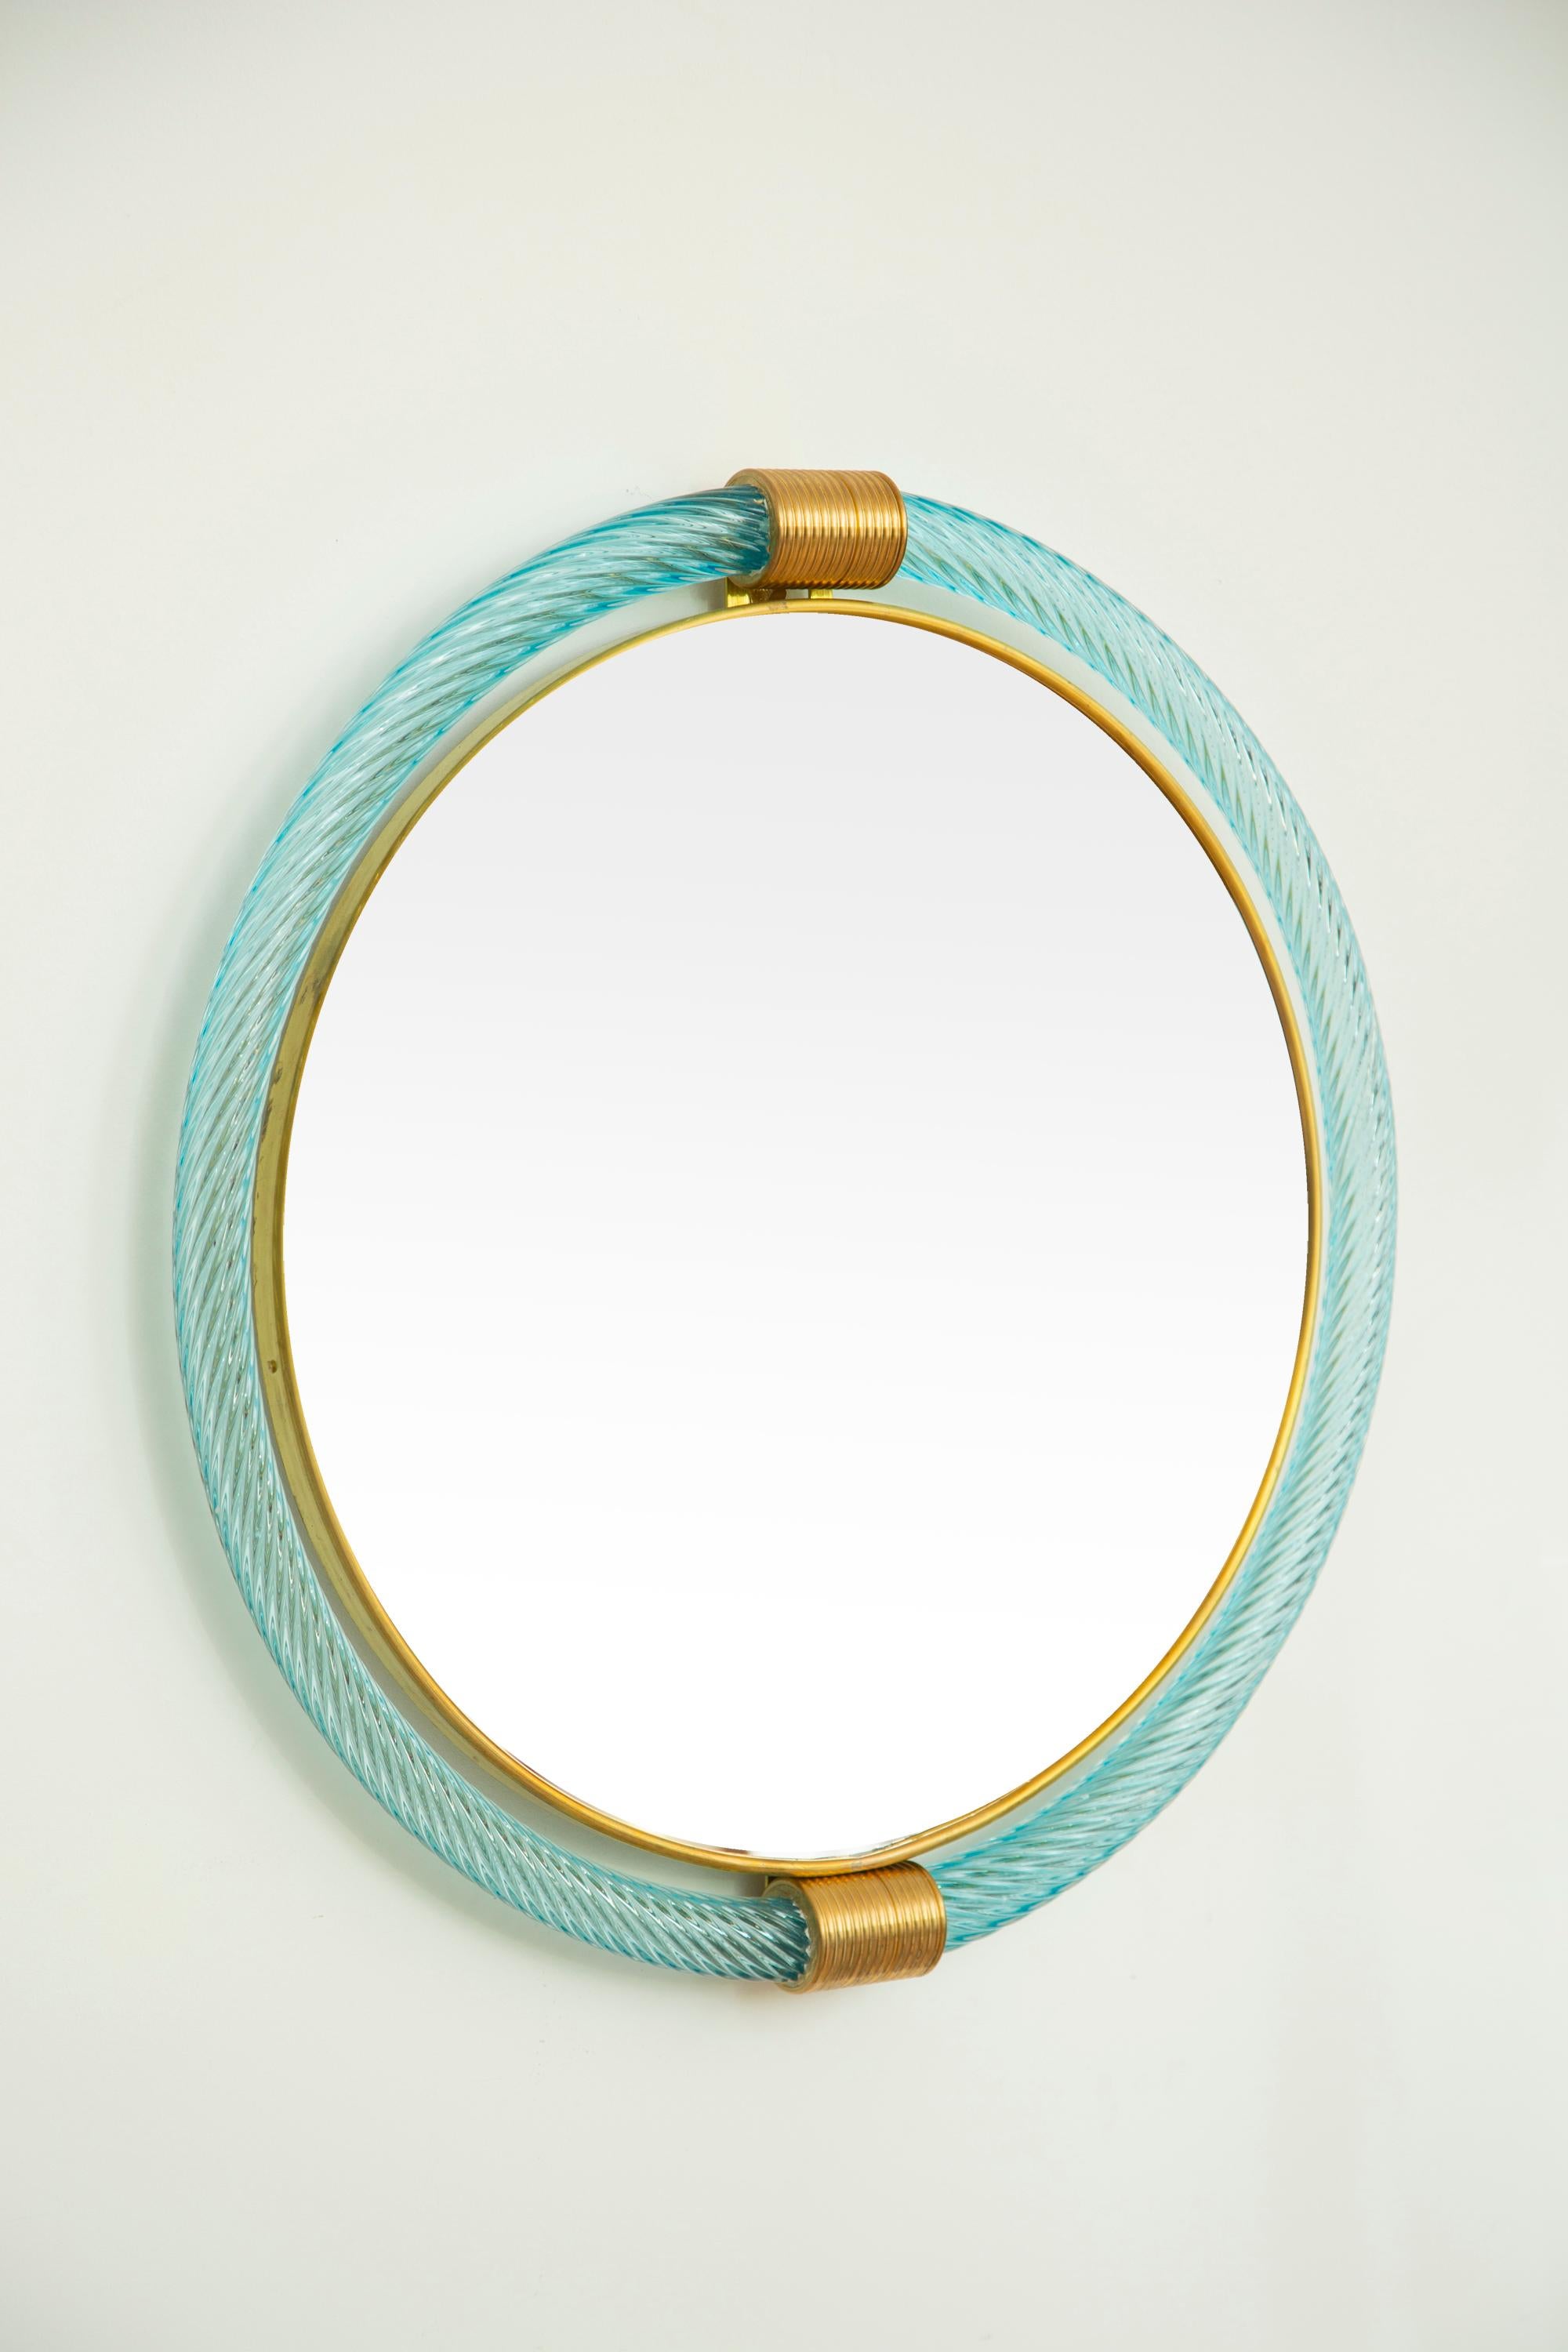 Round light blue twisted rope hand blown murano glass mirror, in stock
Light blue Murano hand blown glass
Brass fittings and a thin inner brass gallery
See other colors from our collection
Located in our store in Miami ready for shipping.